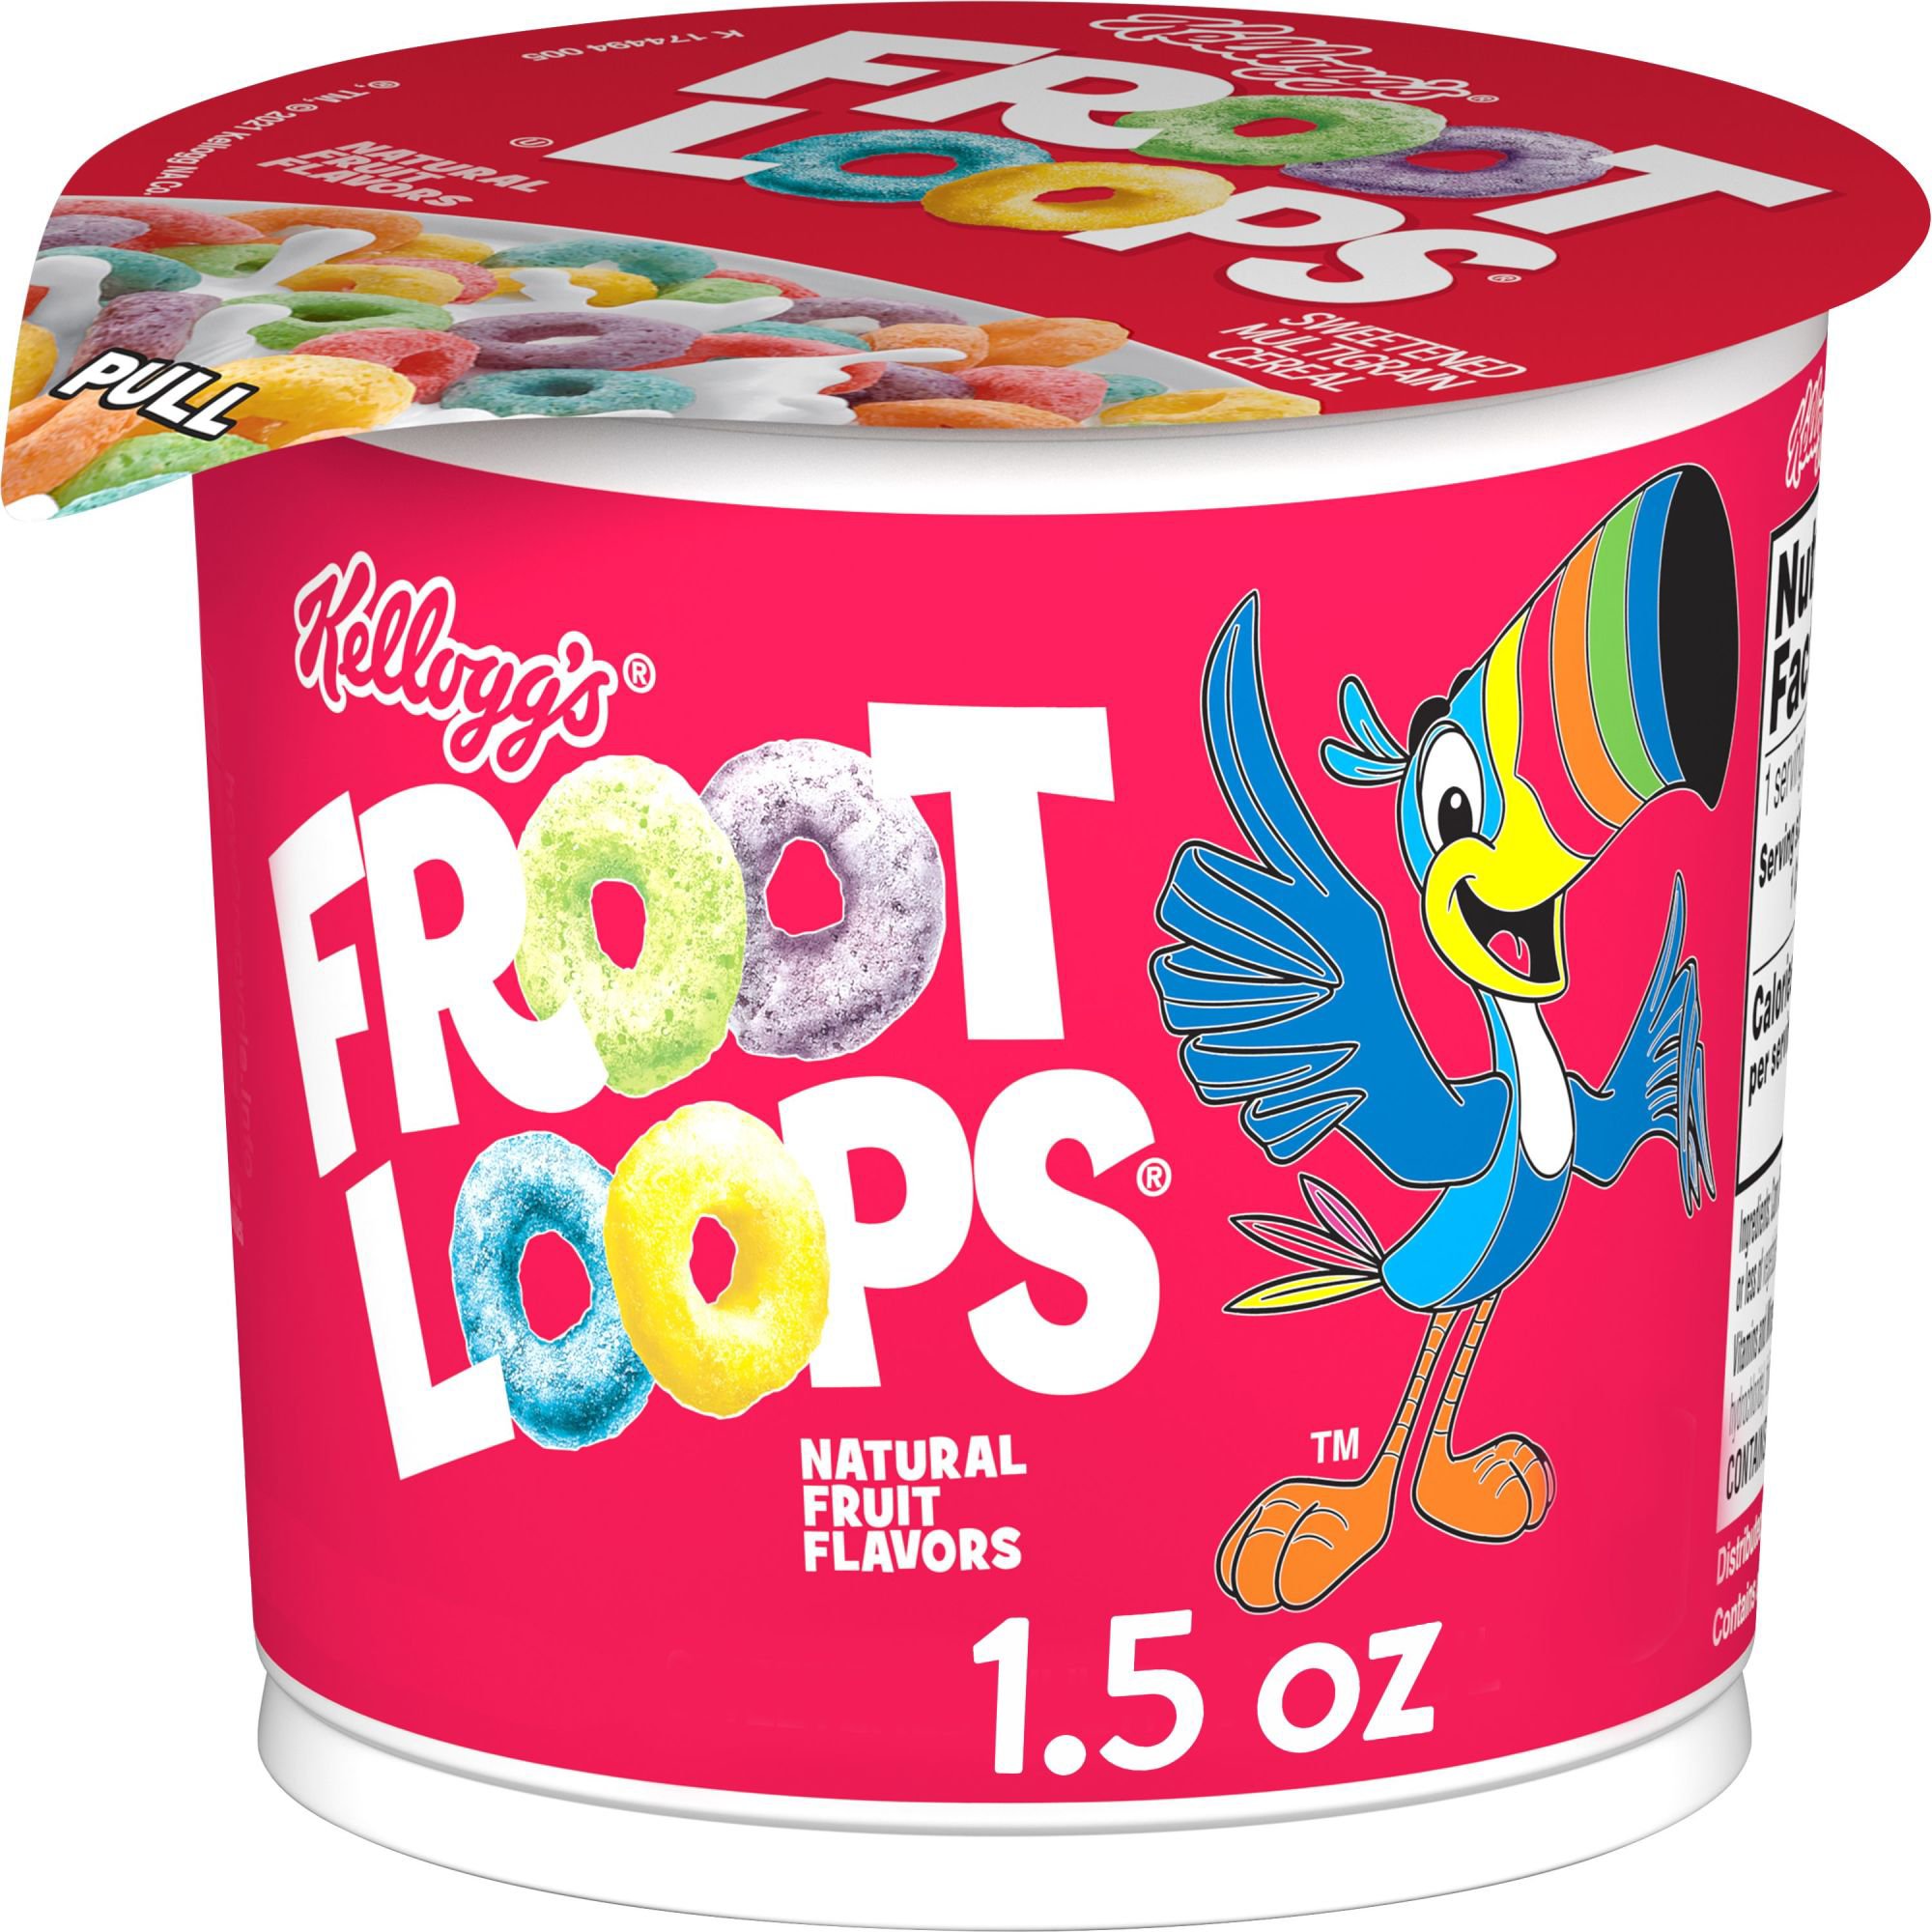 Kellogg's Froot Loops Cereal Cup - Shop Cereal at H-E-B